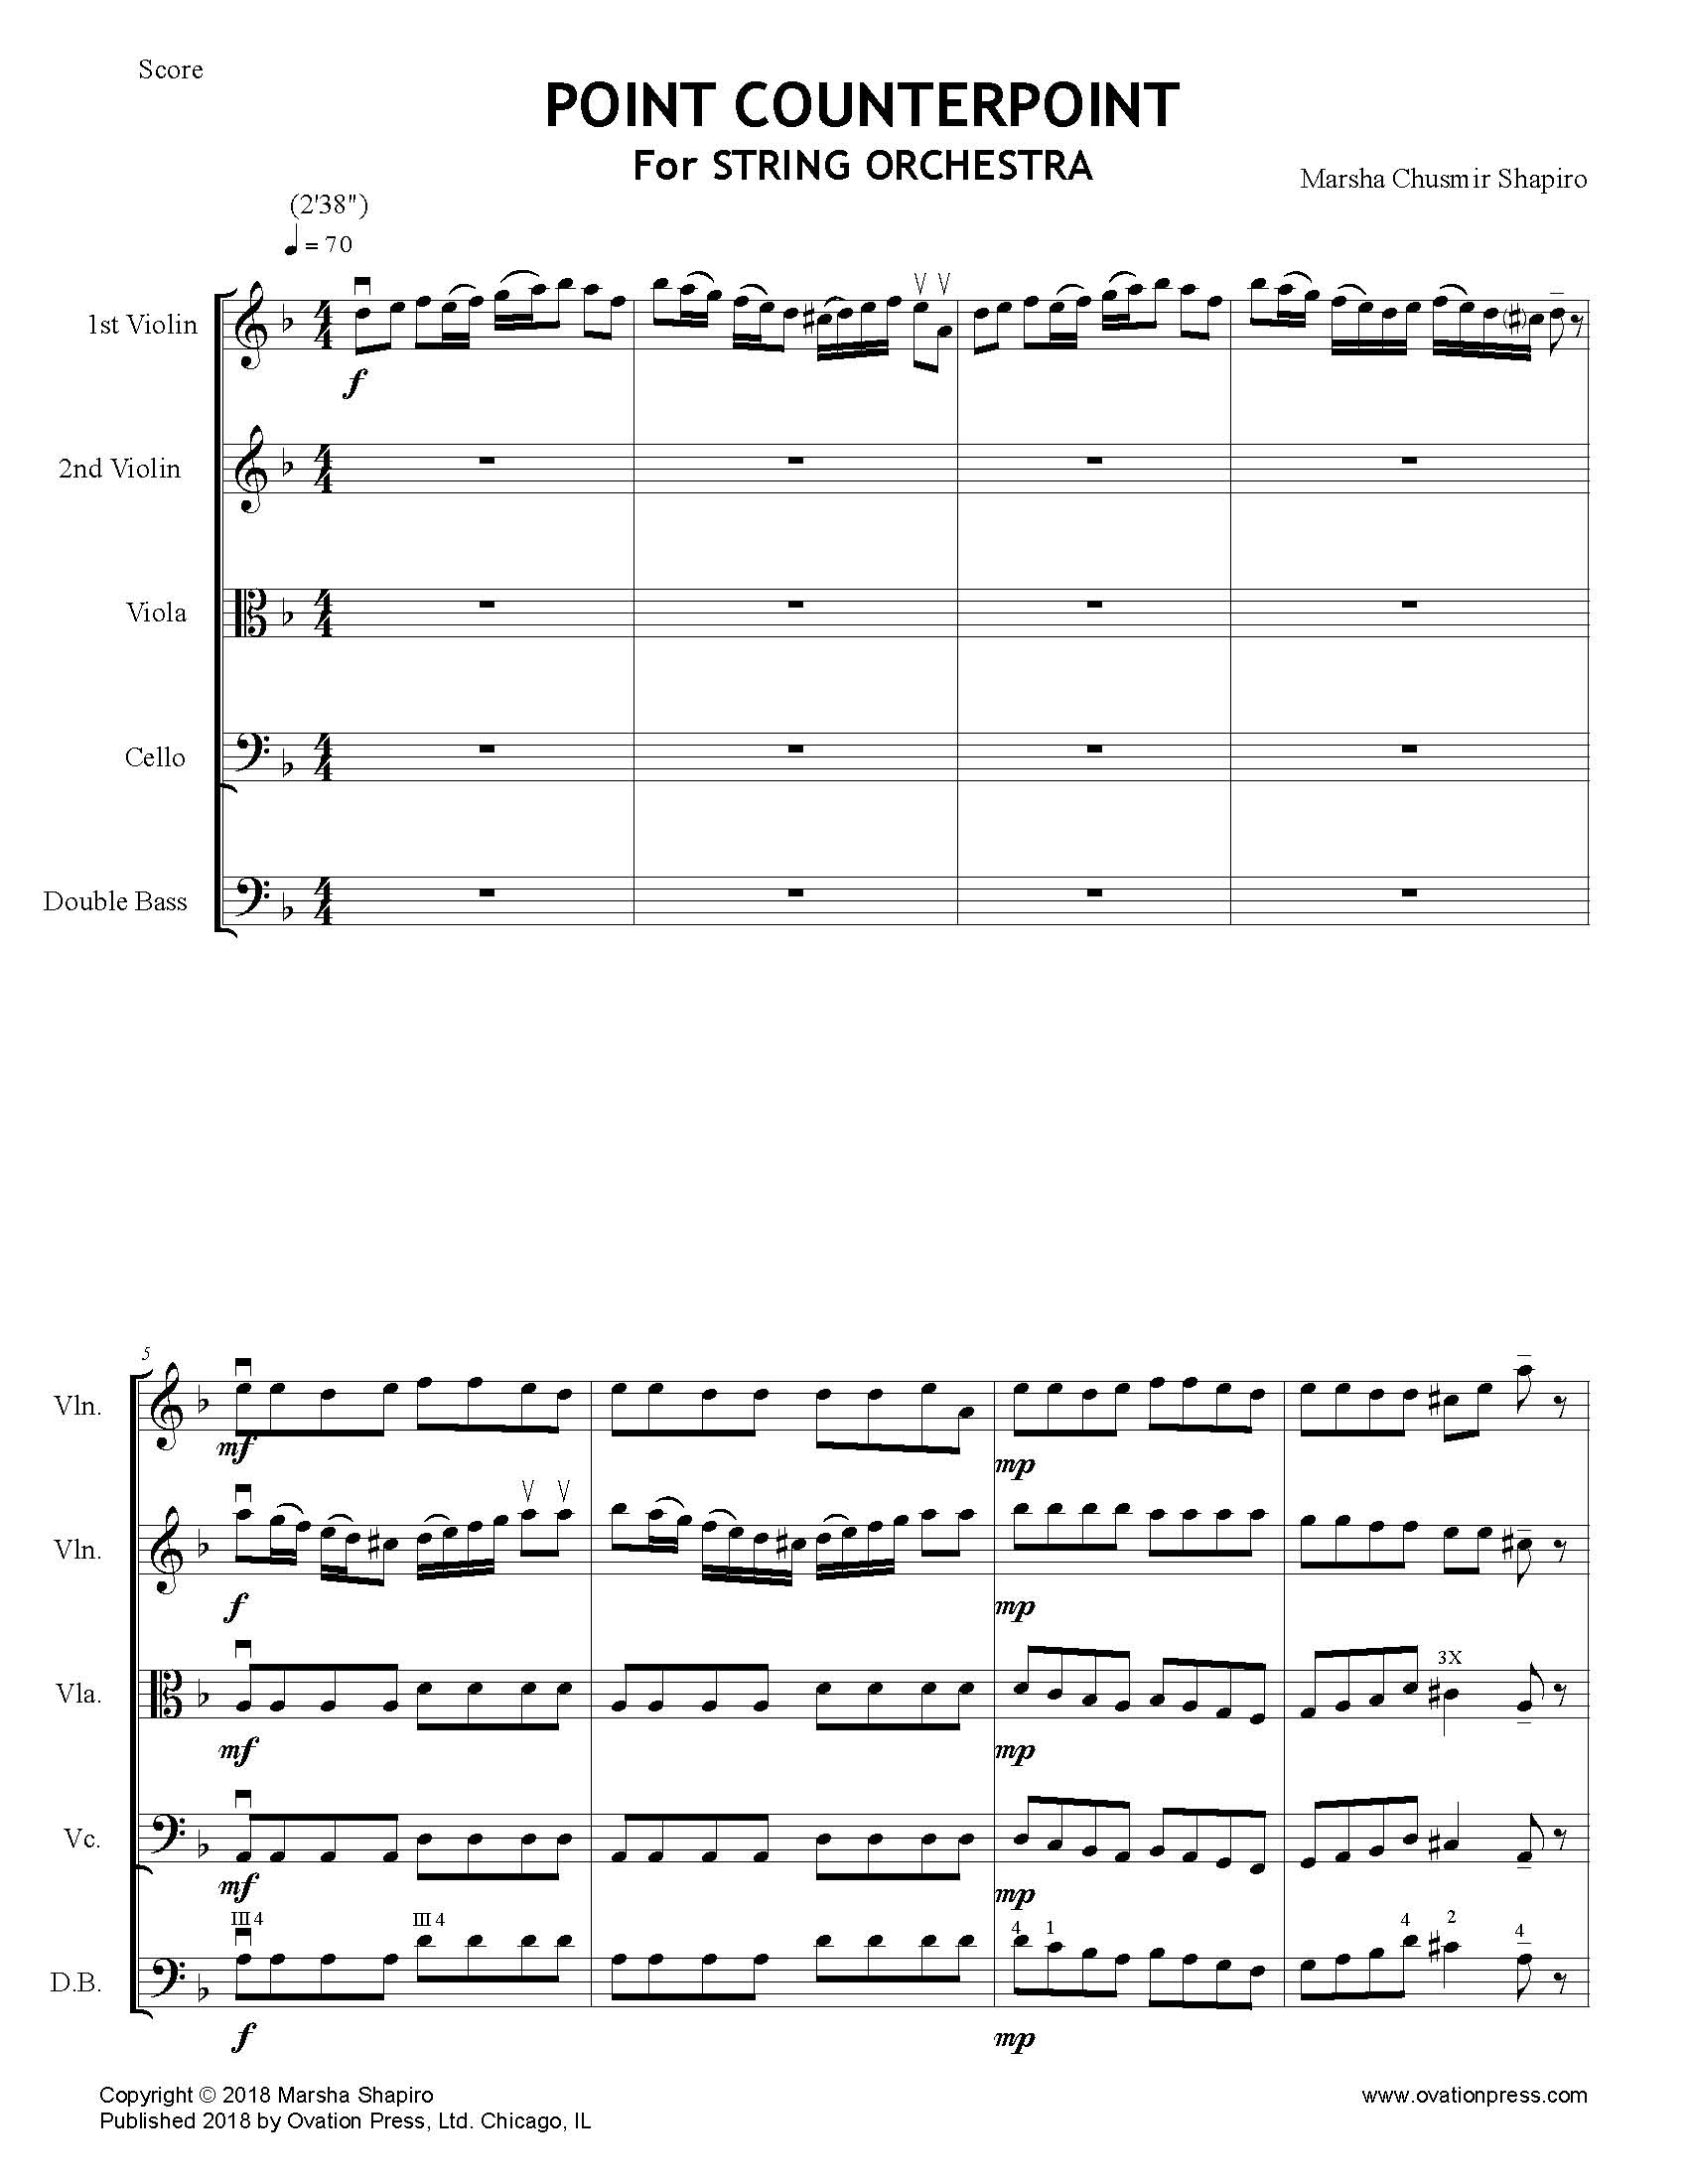 Point Counterpoint for String Orchestra